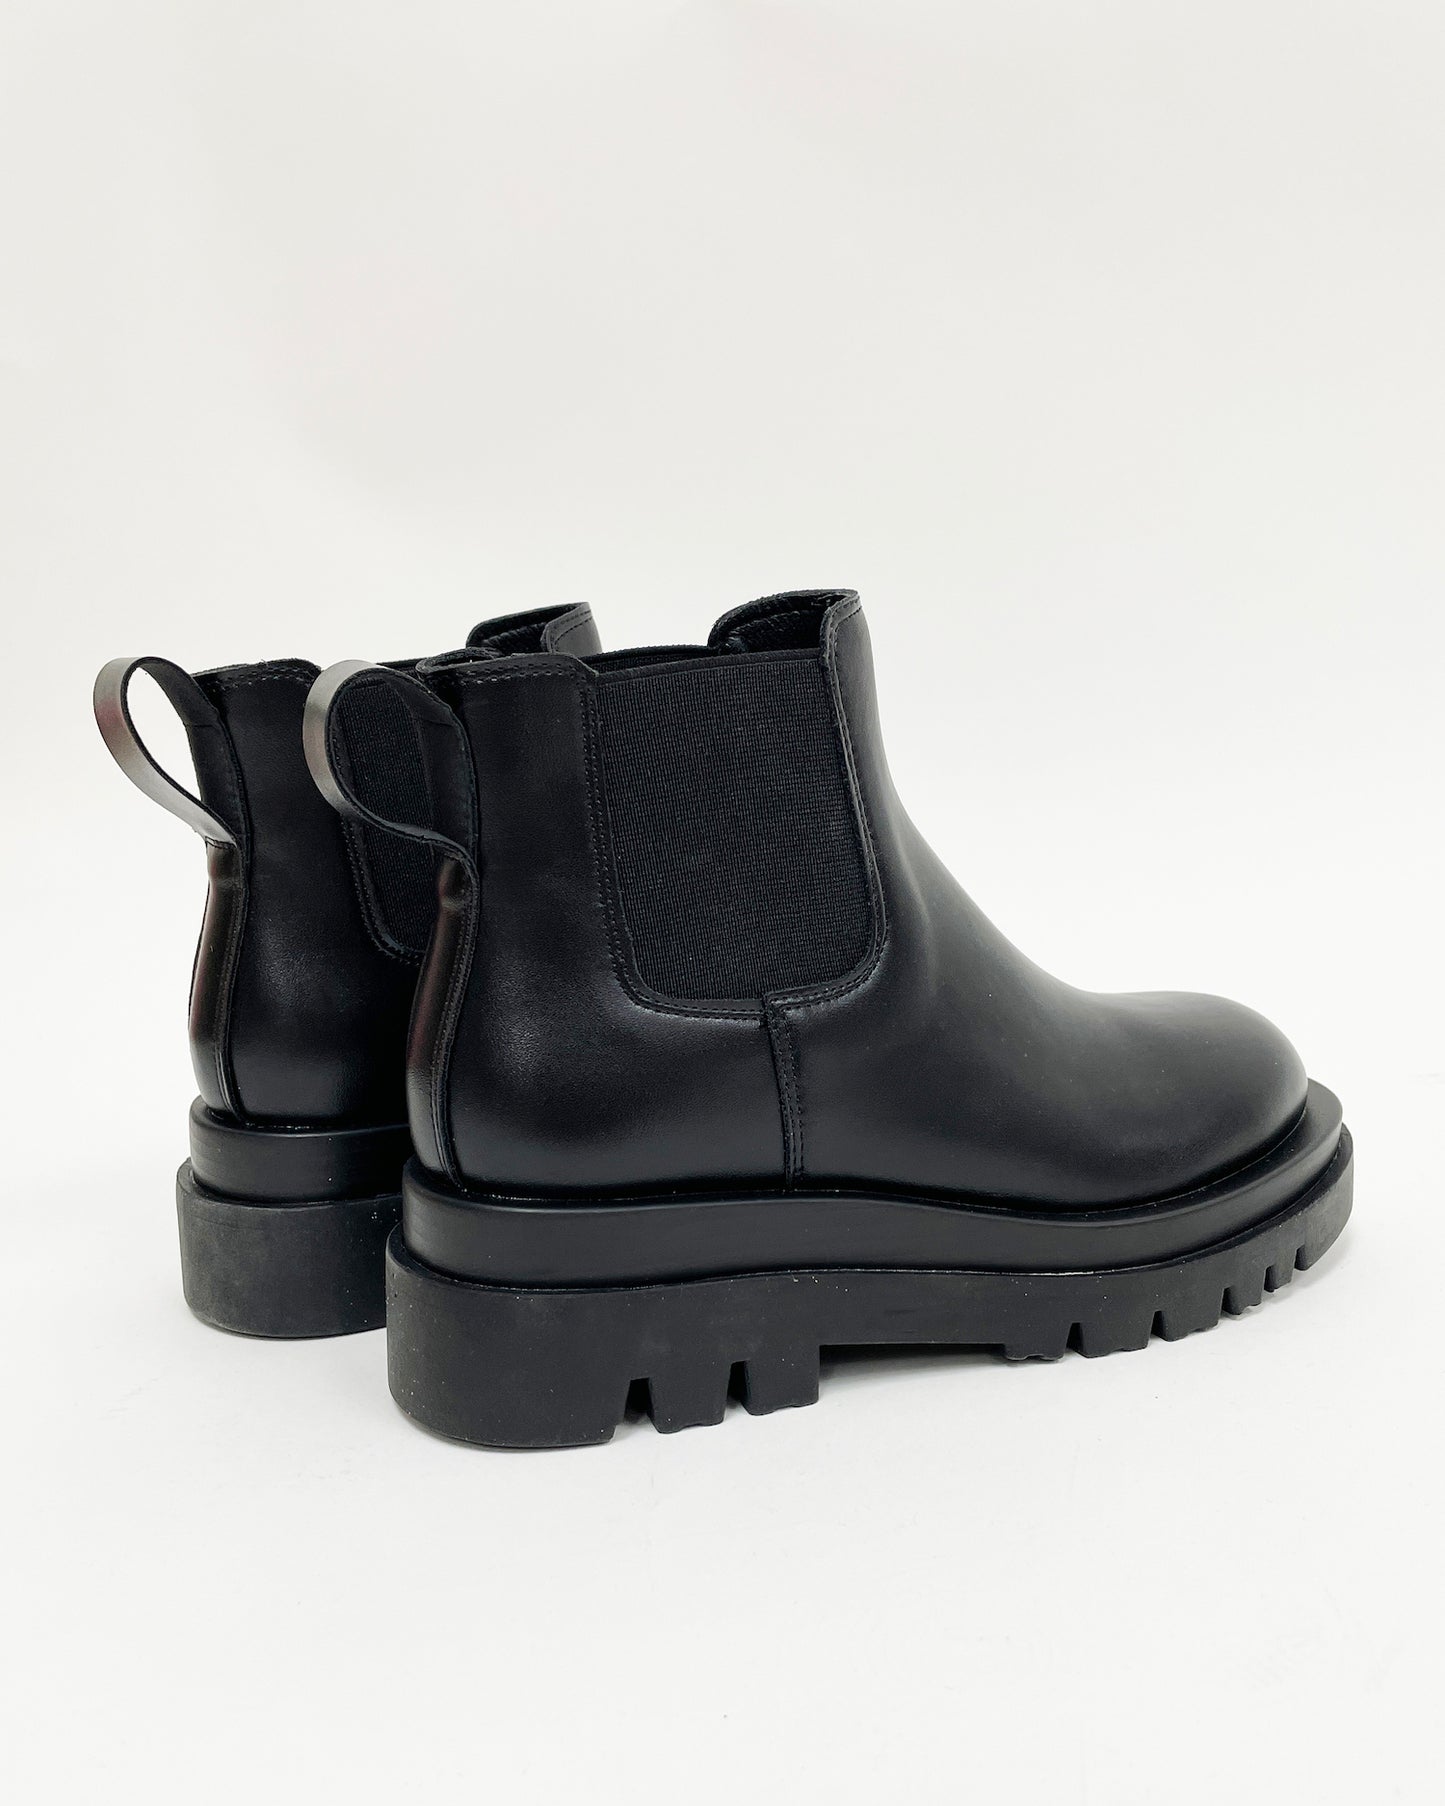 black leather chelsea boots *pre-order*